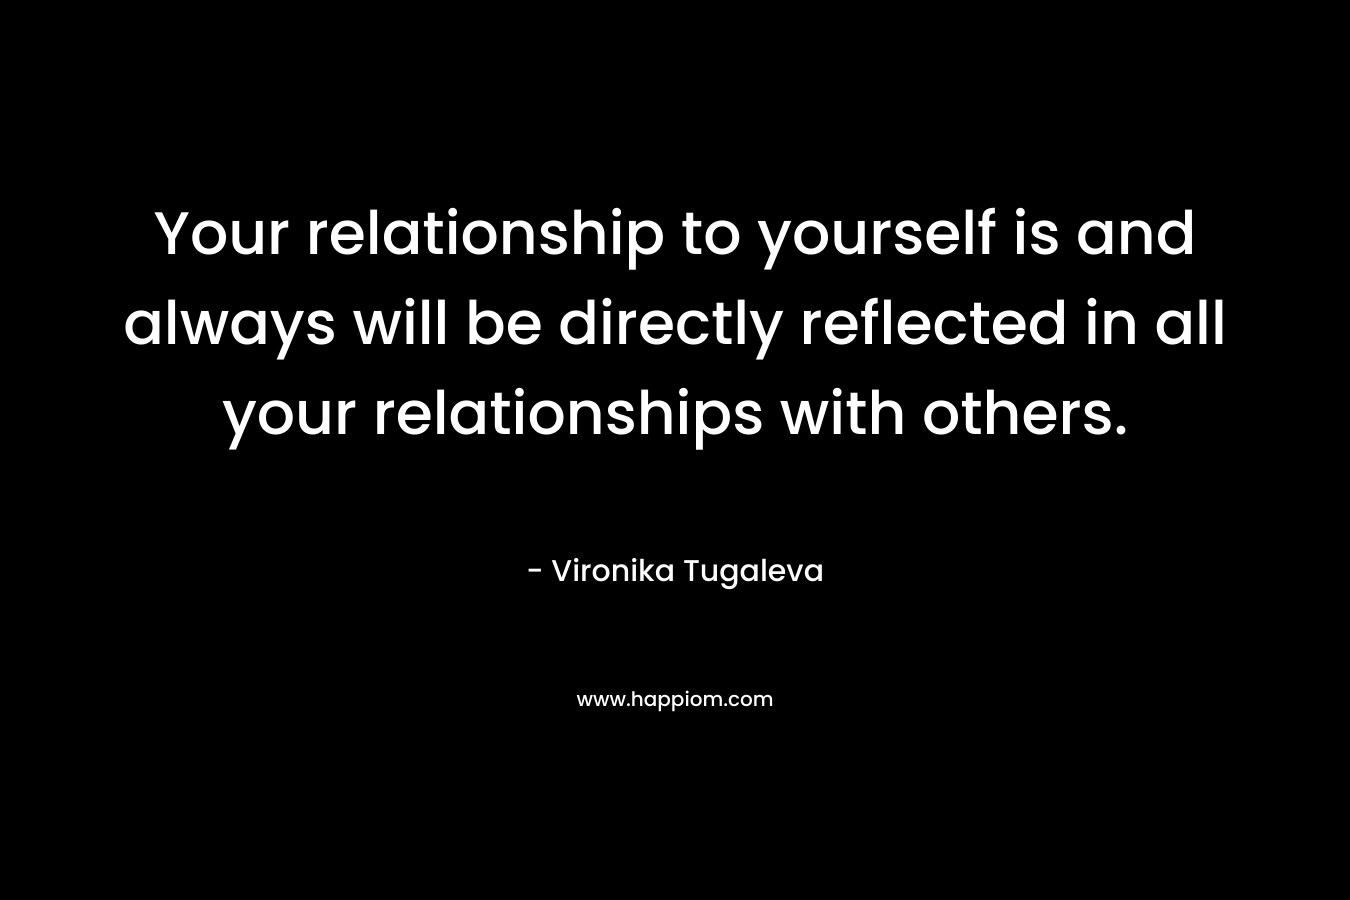 Your relationship to yourself is and always will be directly reflected in all your relationships with others.